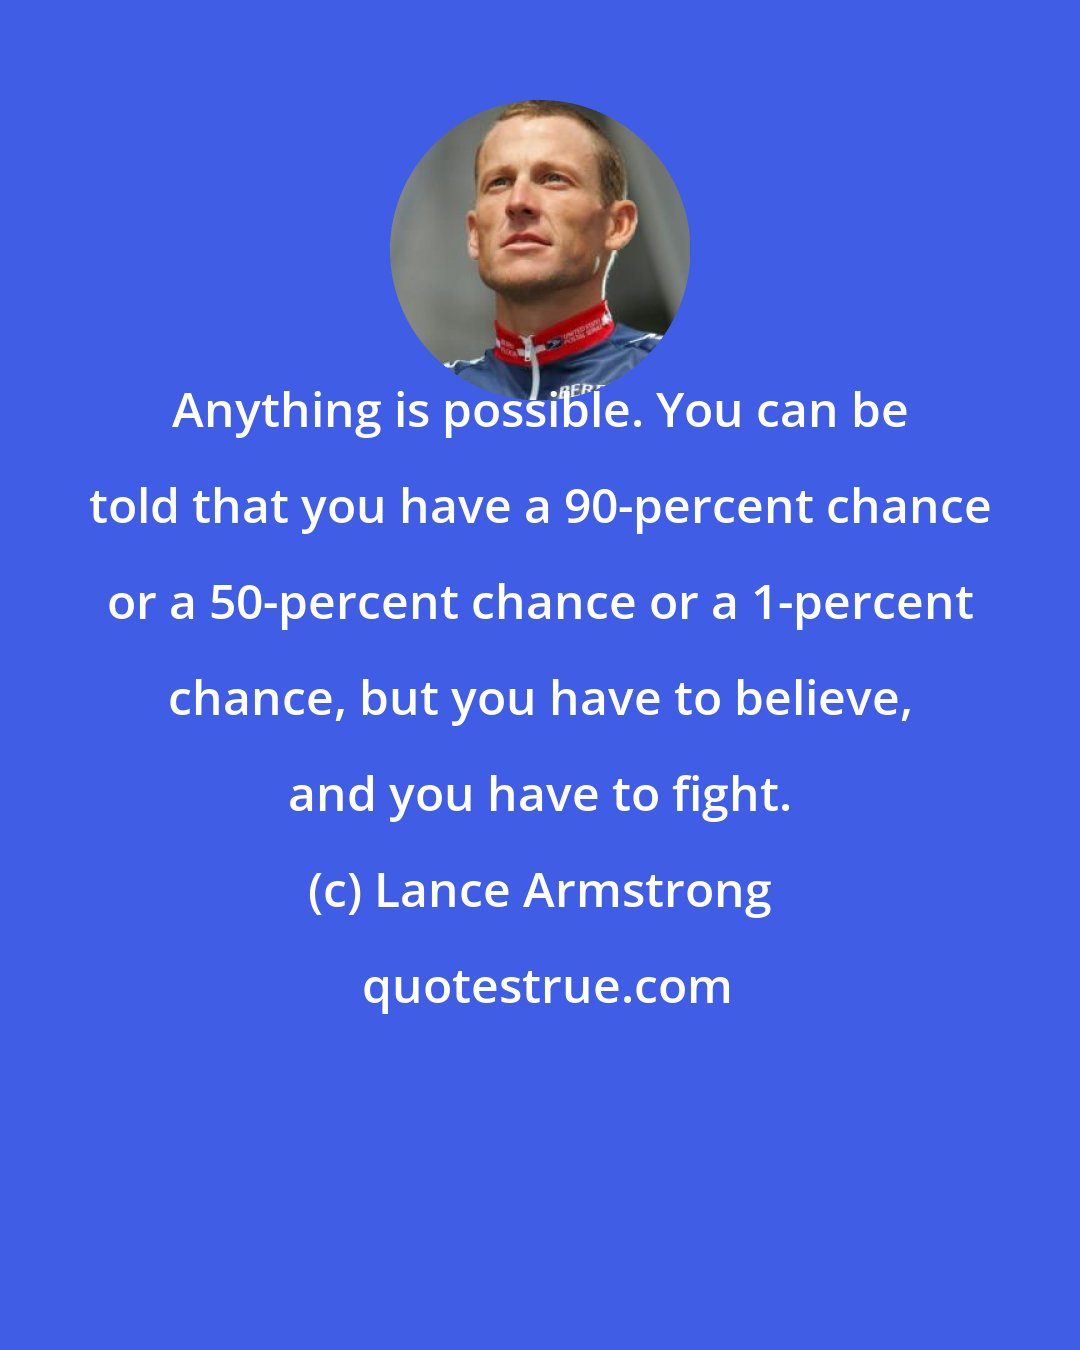 Lance Armstrong: Anything is possible. You can be told that you have a 90-percent chance or a 50-percent chance or a 1-percent chance, but you have to believe, and you have to fight.